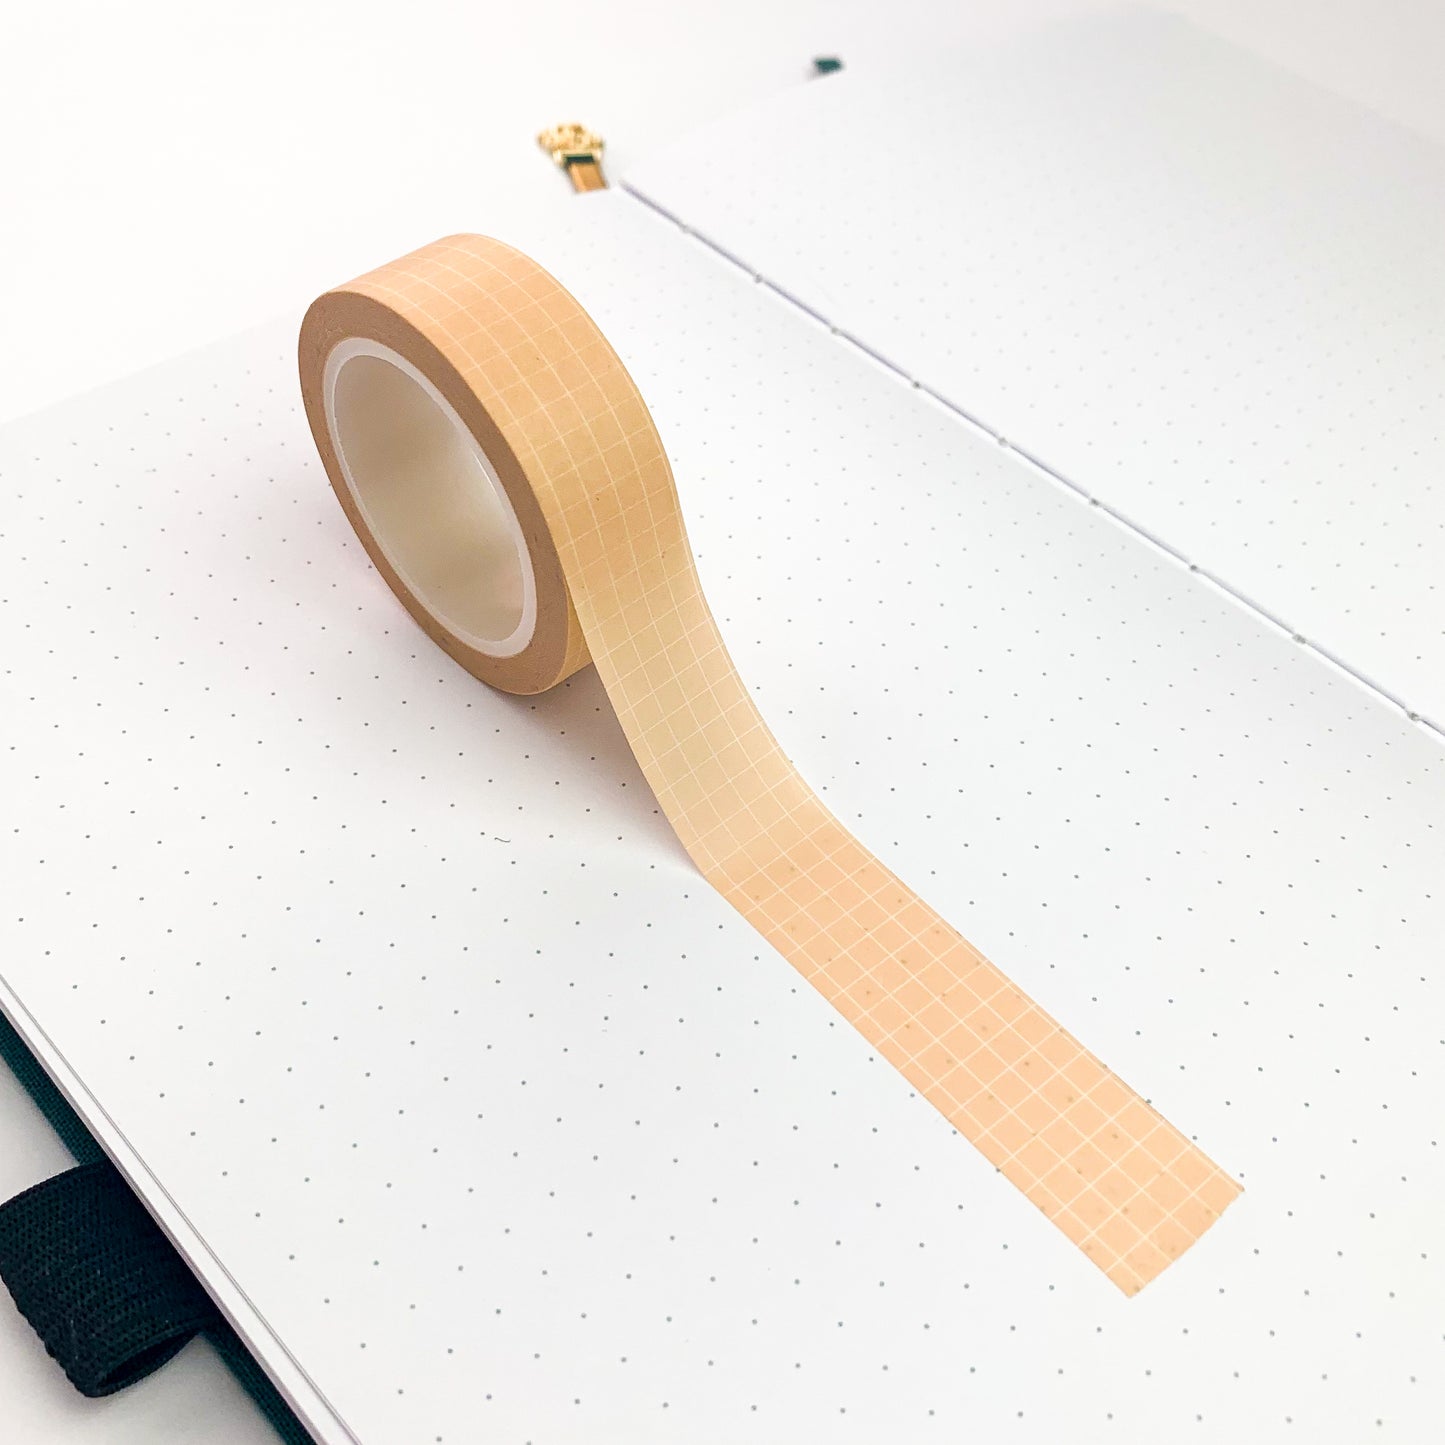 Peach grid washi tape roll laid out